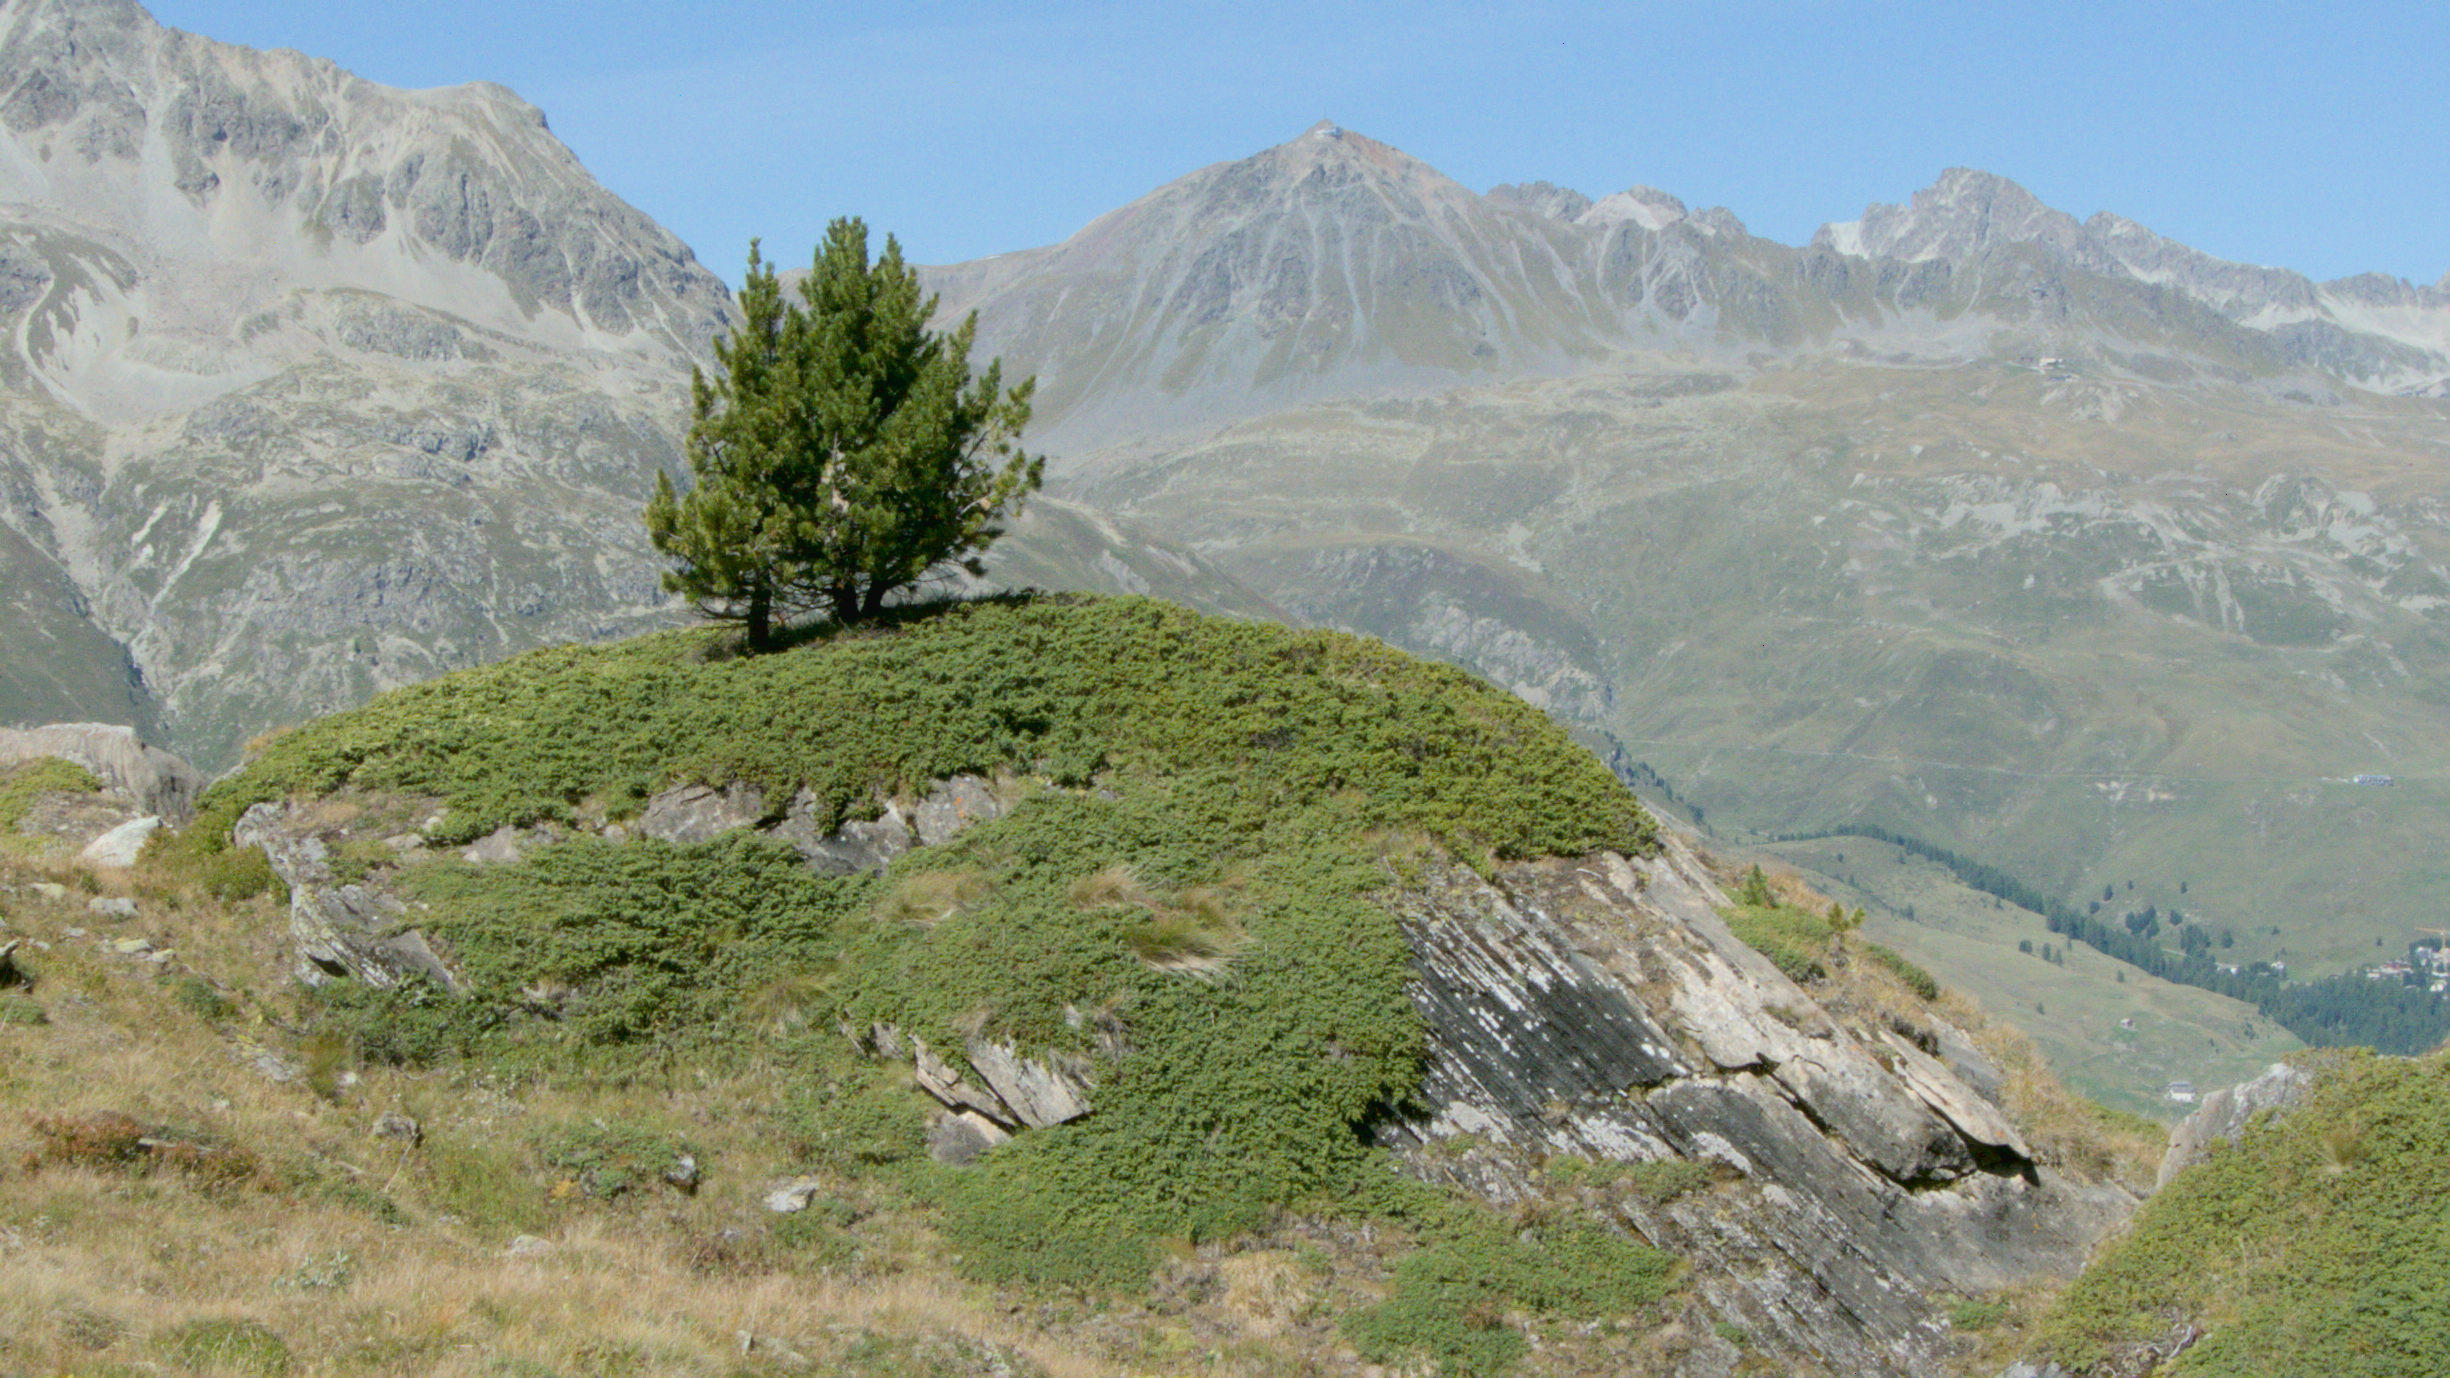 a tree on a hill with mountains in the background